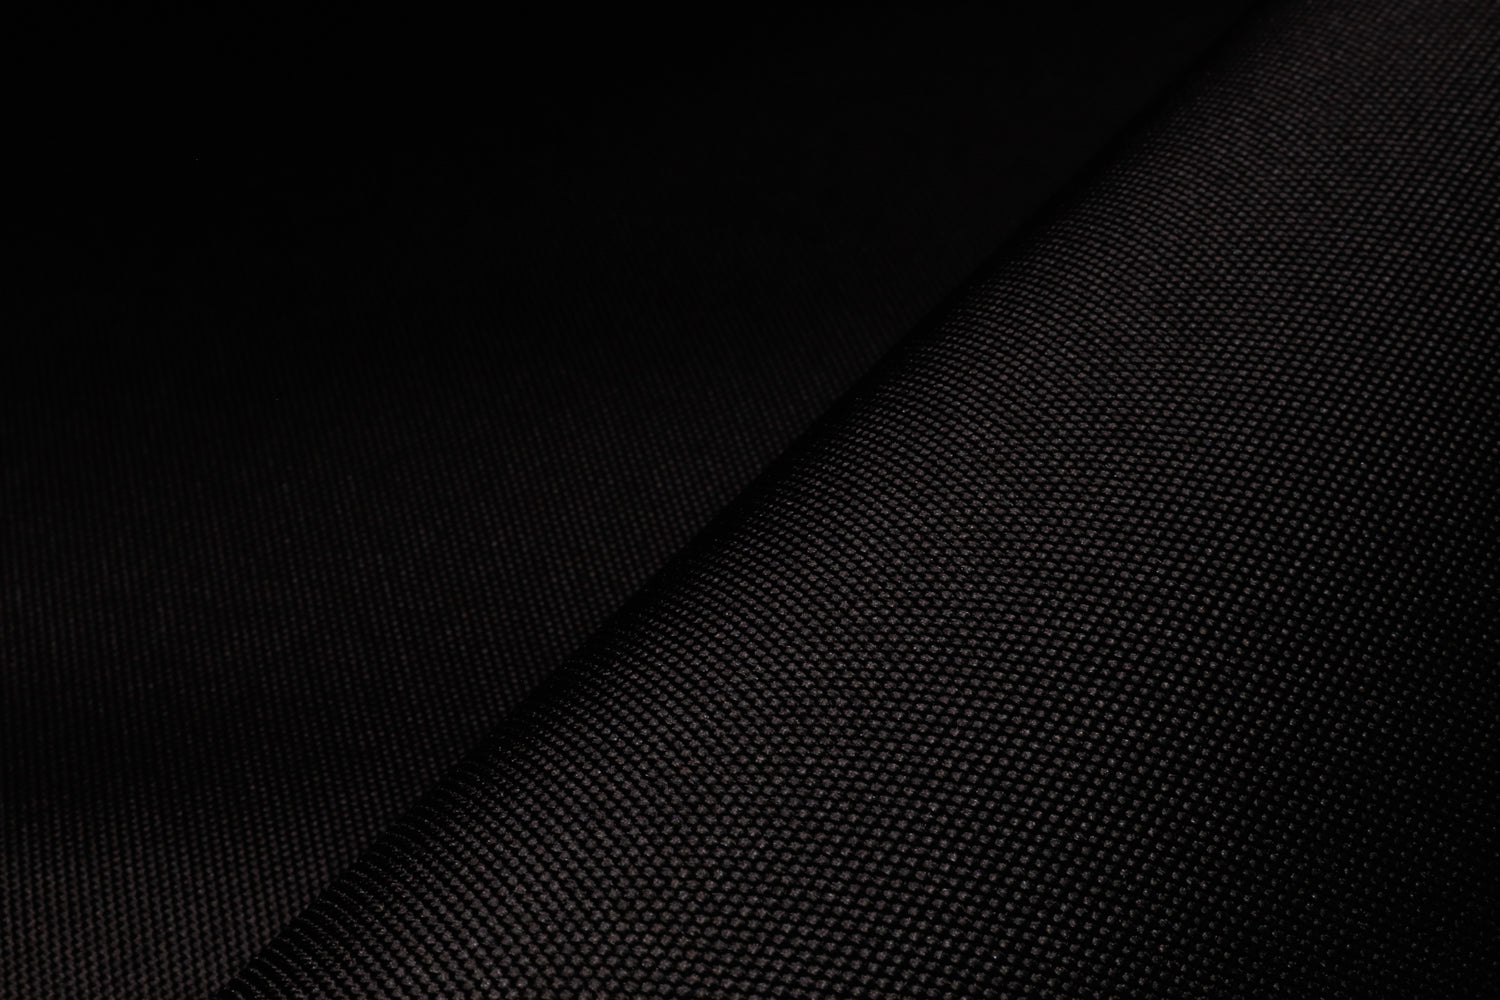 Black 1200D recycled Cordura fabric with water-resistant coating